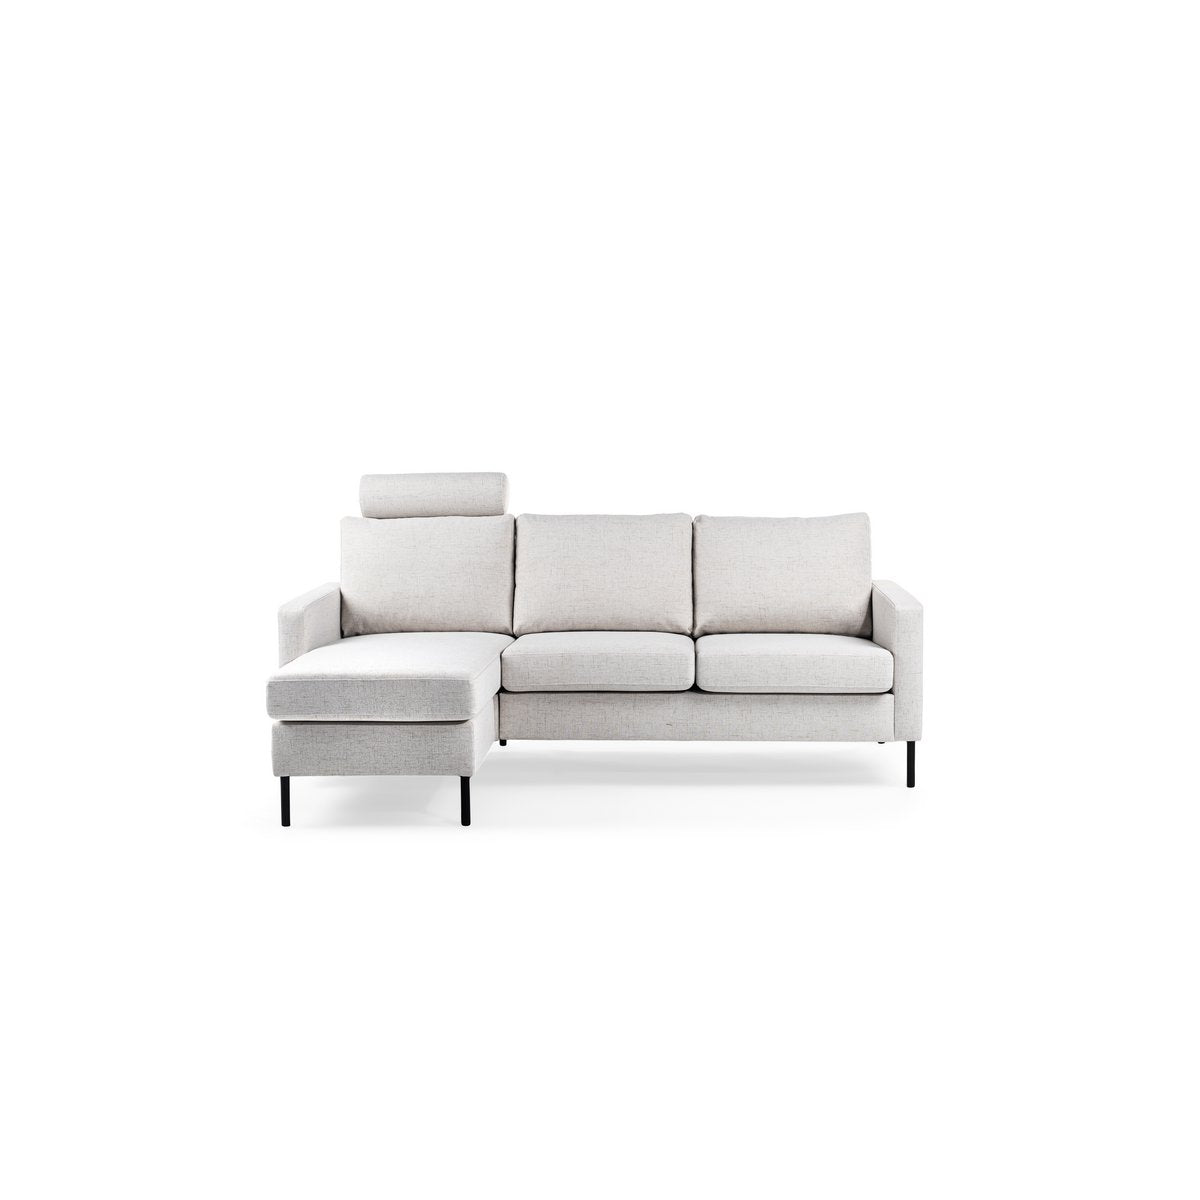 3 seater sofa CL L+R, with headrest, fabric Valente, V920 natural